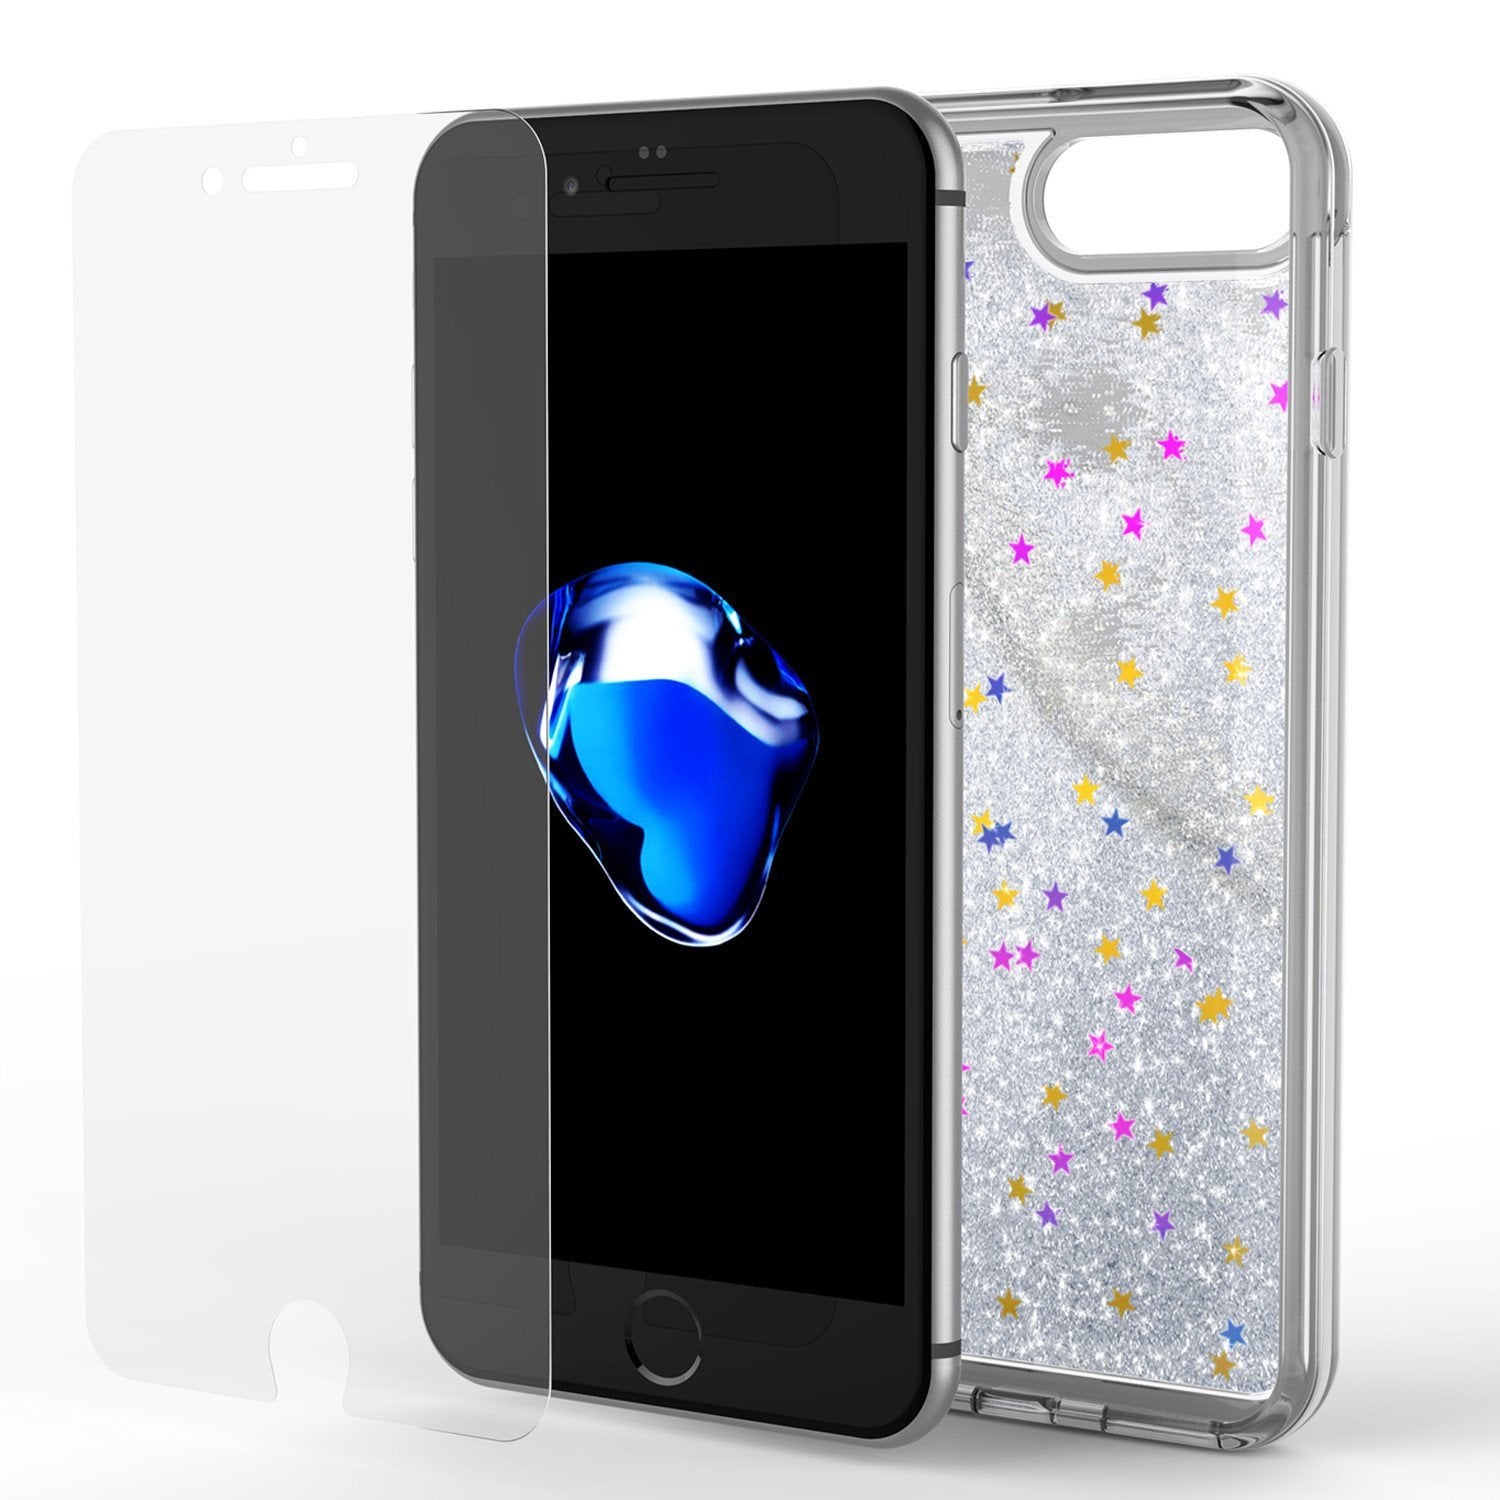 iPhone 8+ Plus Case, PunkCase LIQUID Silver Series, Protective Dual Layer Floating Glitter Cover